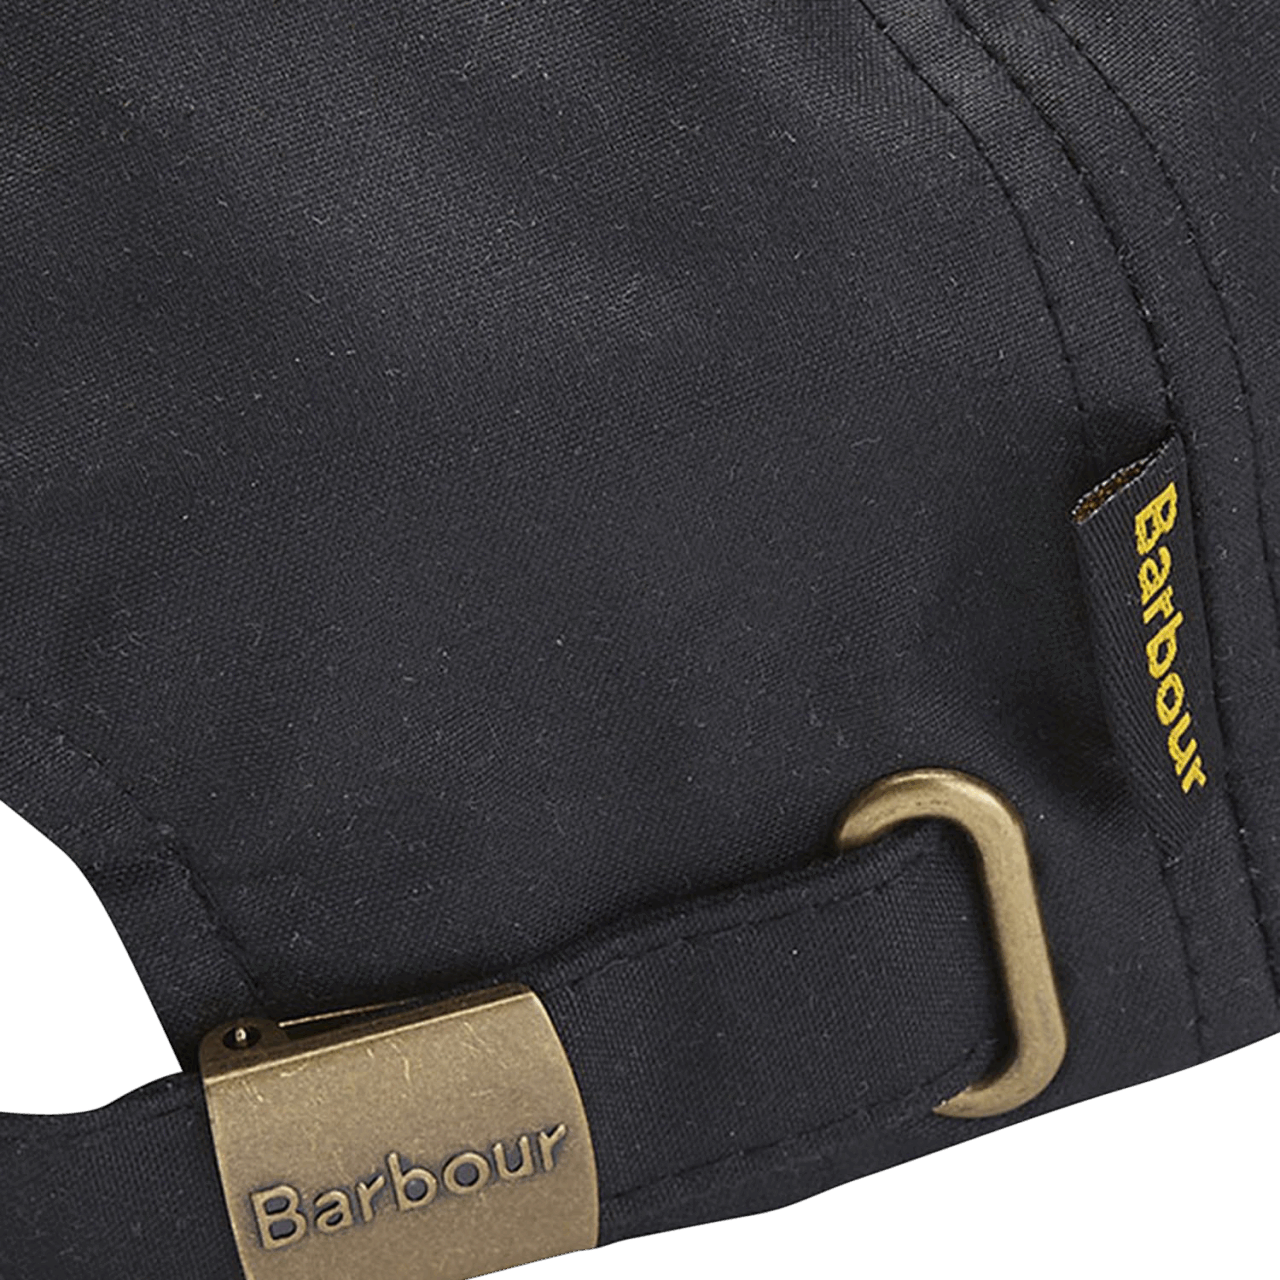 Barbour Waxed Sports Cap - black